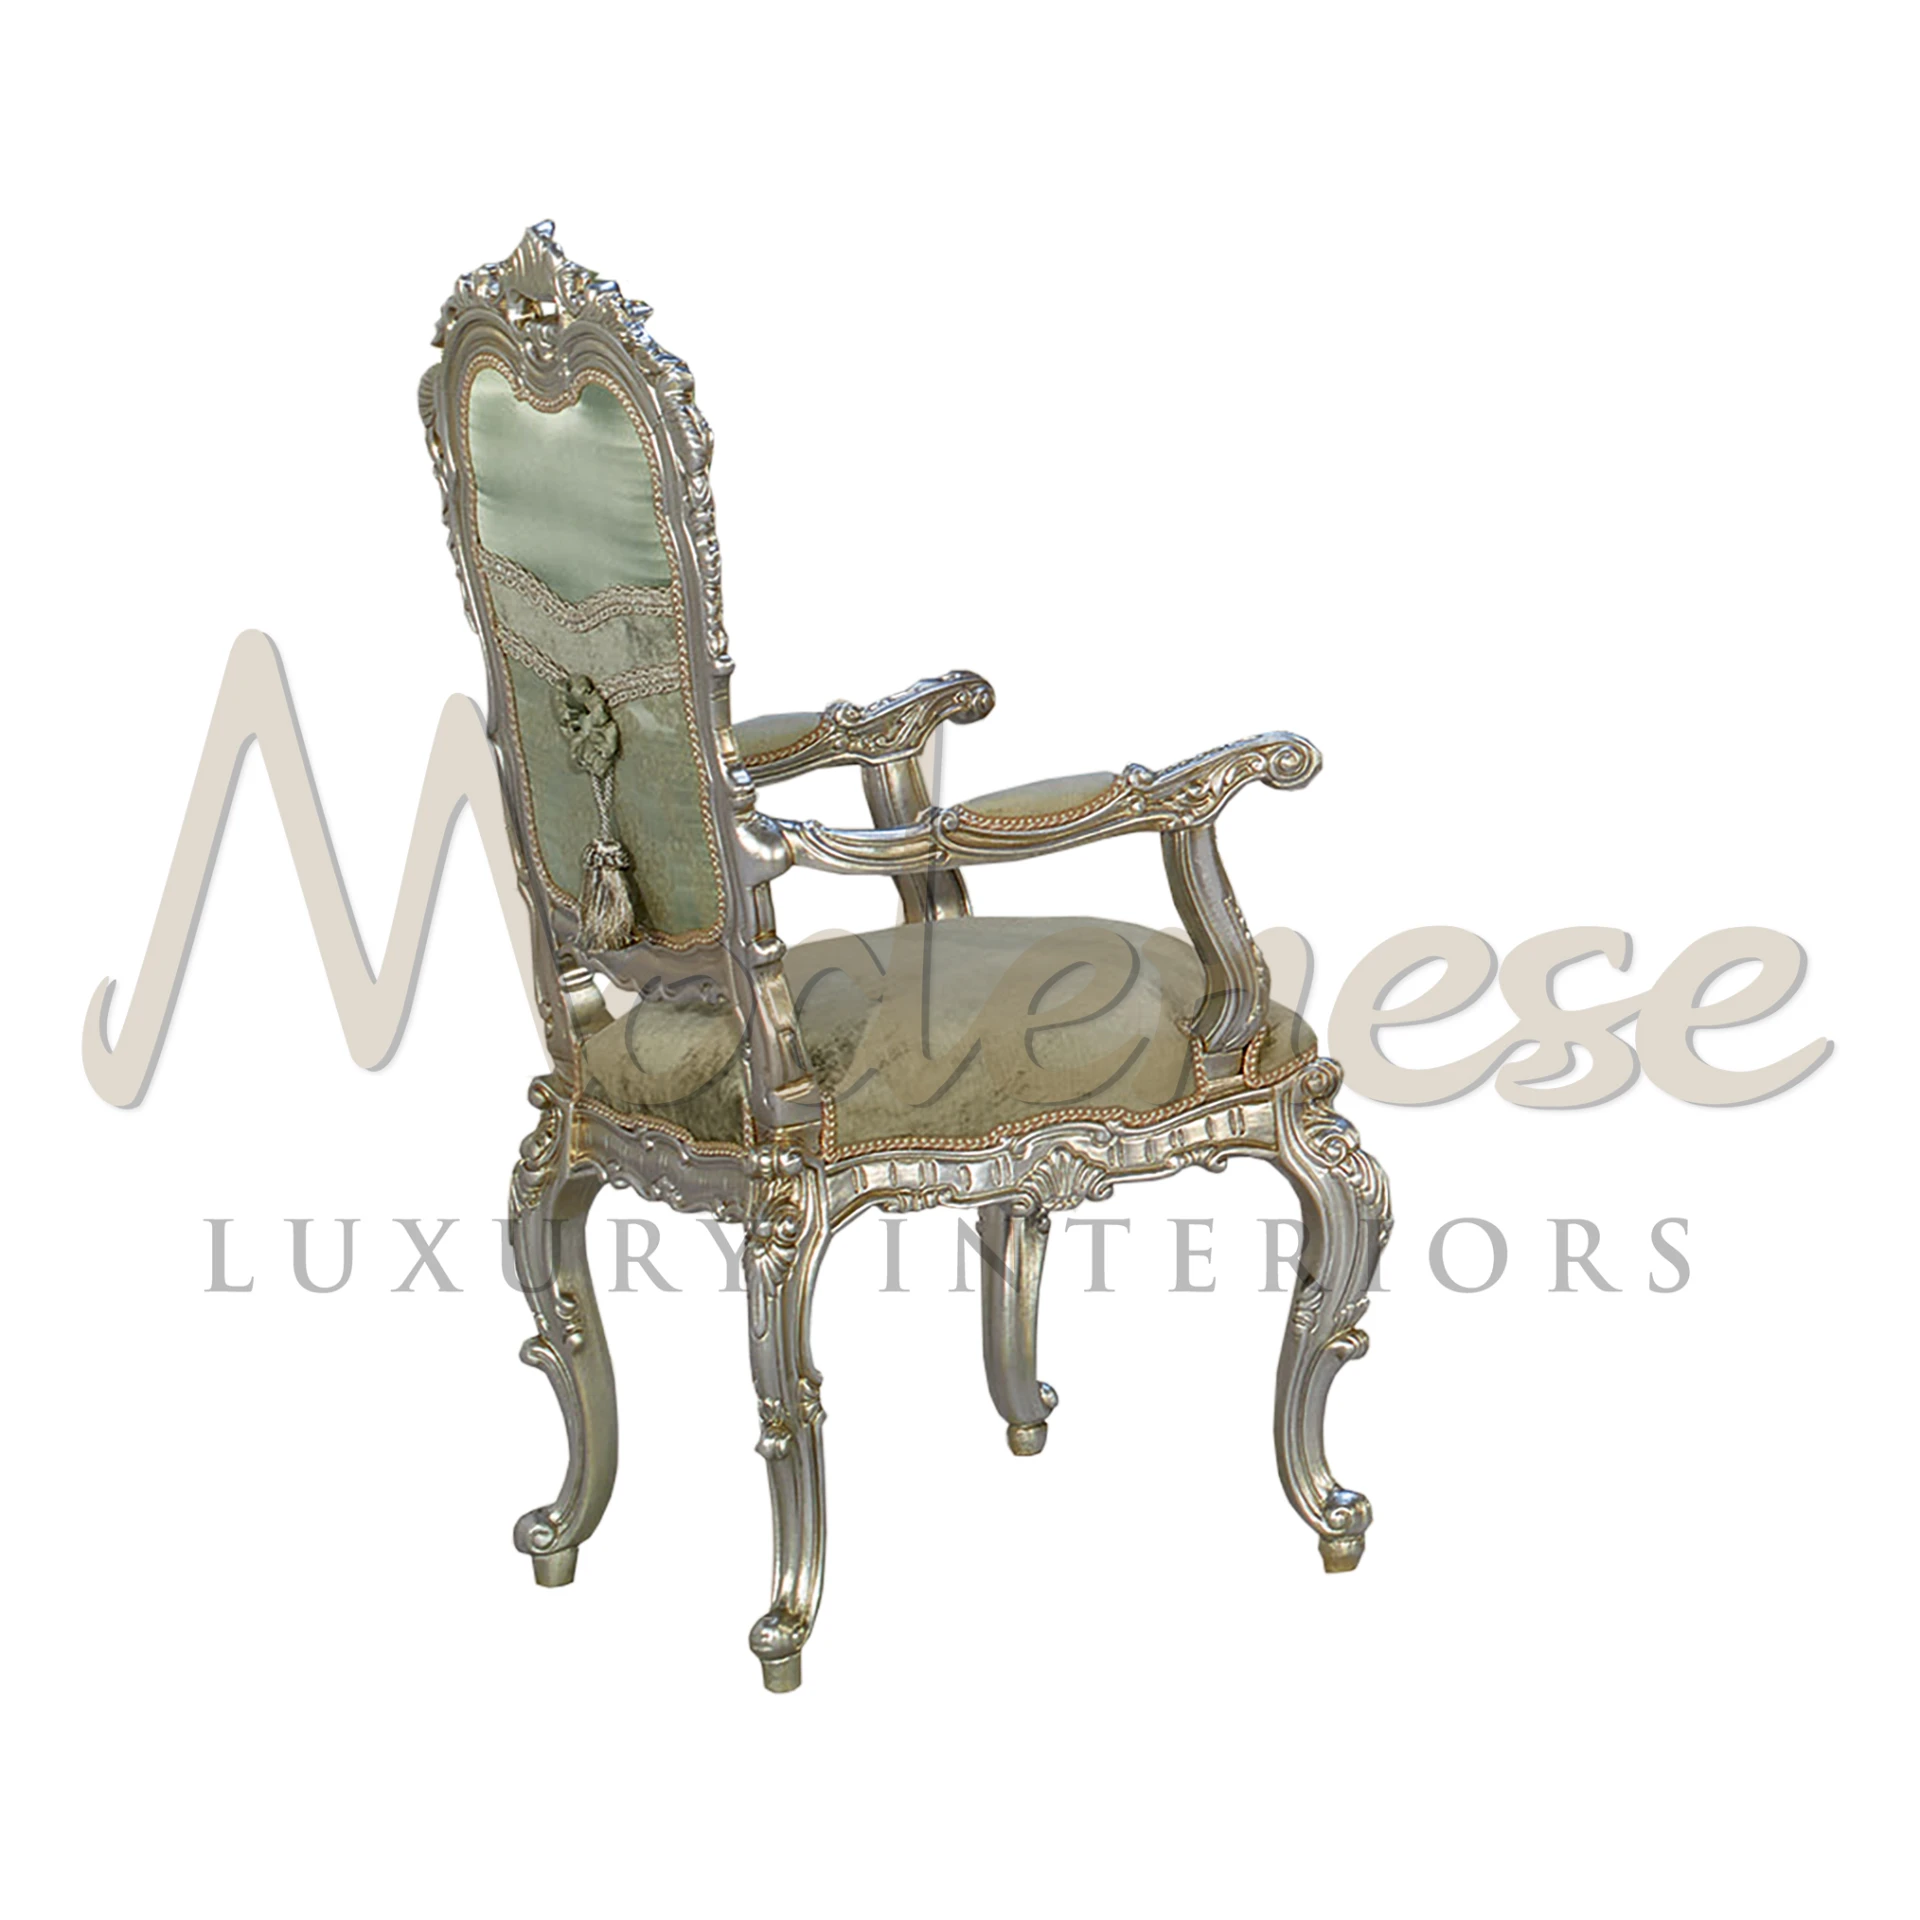 Experience royalty with Modenese Furniture's armchair. Gold leaf finish, premium upholstery, and intricate baroque carvings exude timeless elegance.